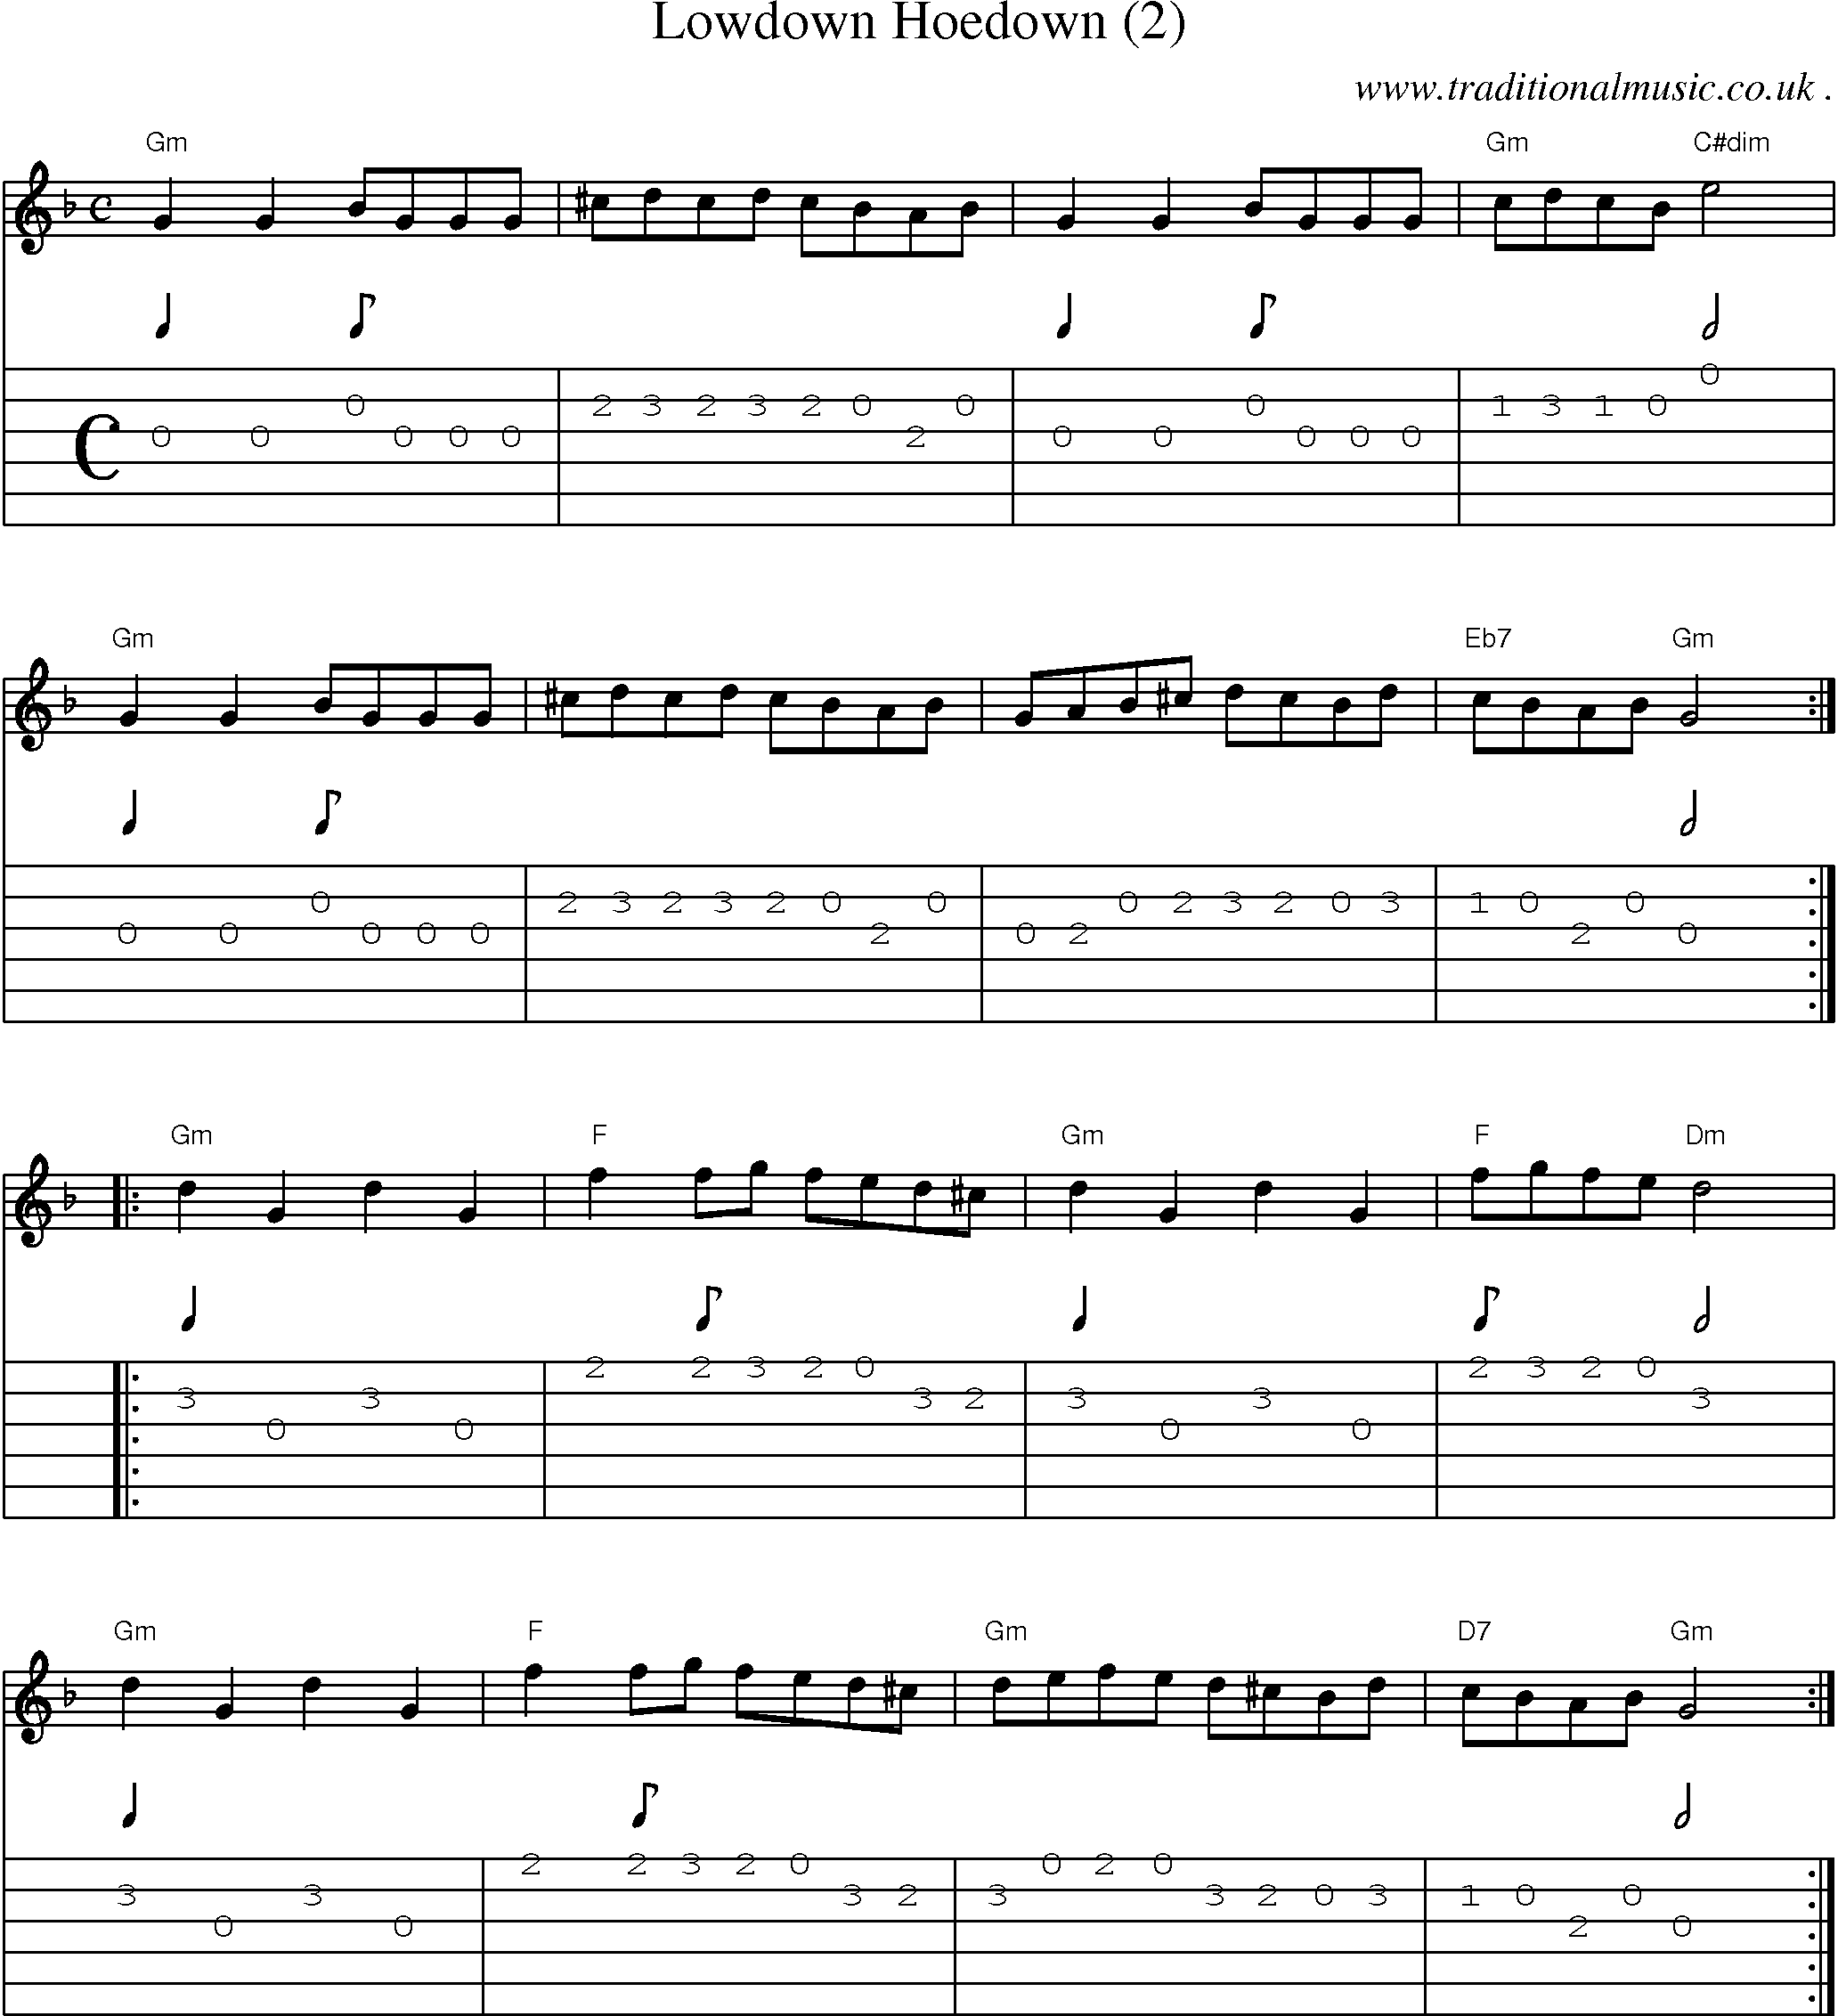 Music Score and Guitar Tabs for Lowdown Hoedown (2)